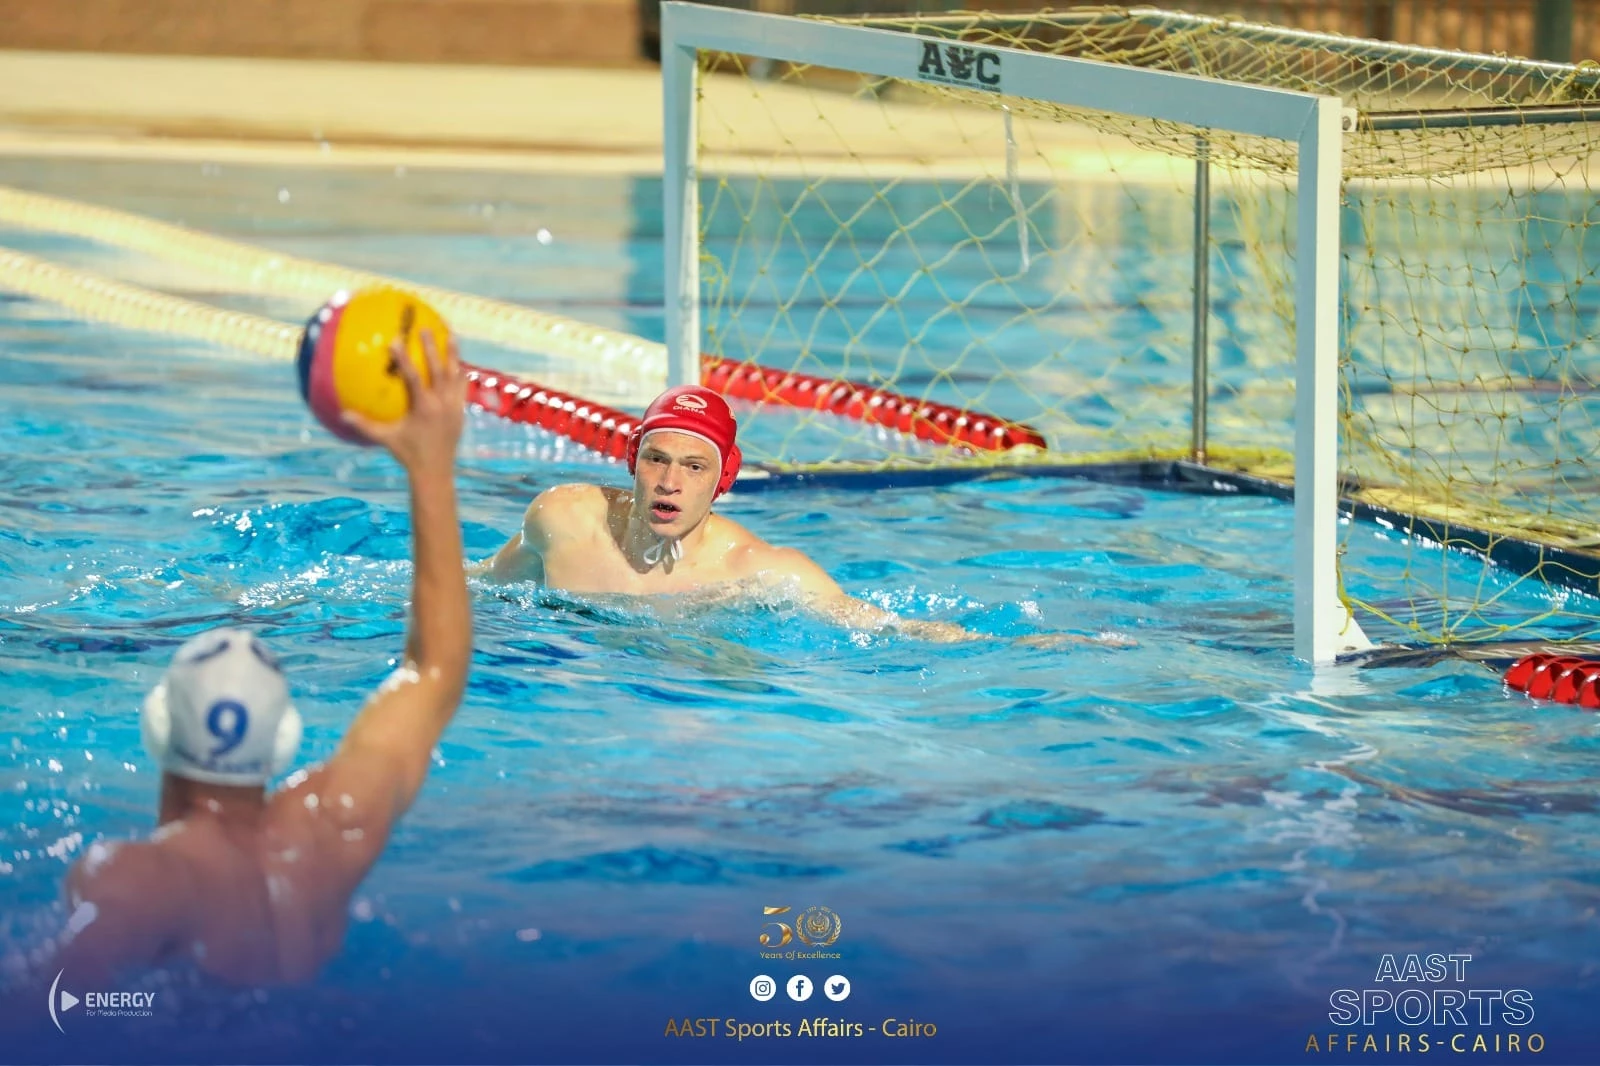 The Academy's water polo team in Cairo wins silver in the championship of private universities held at the American University in Cairo.3